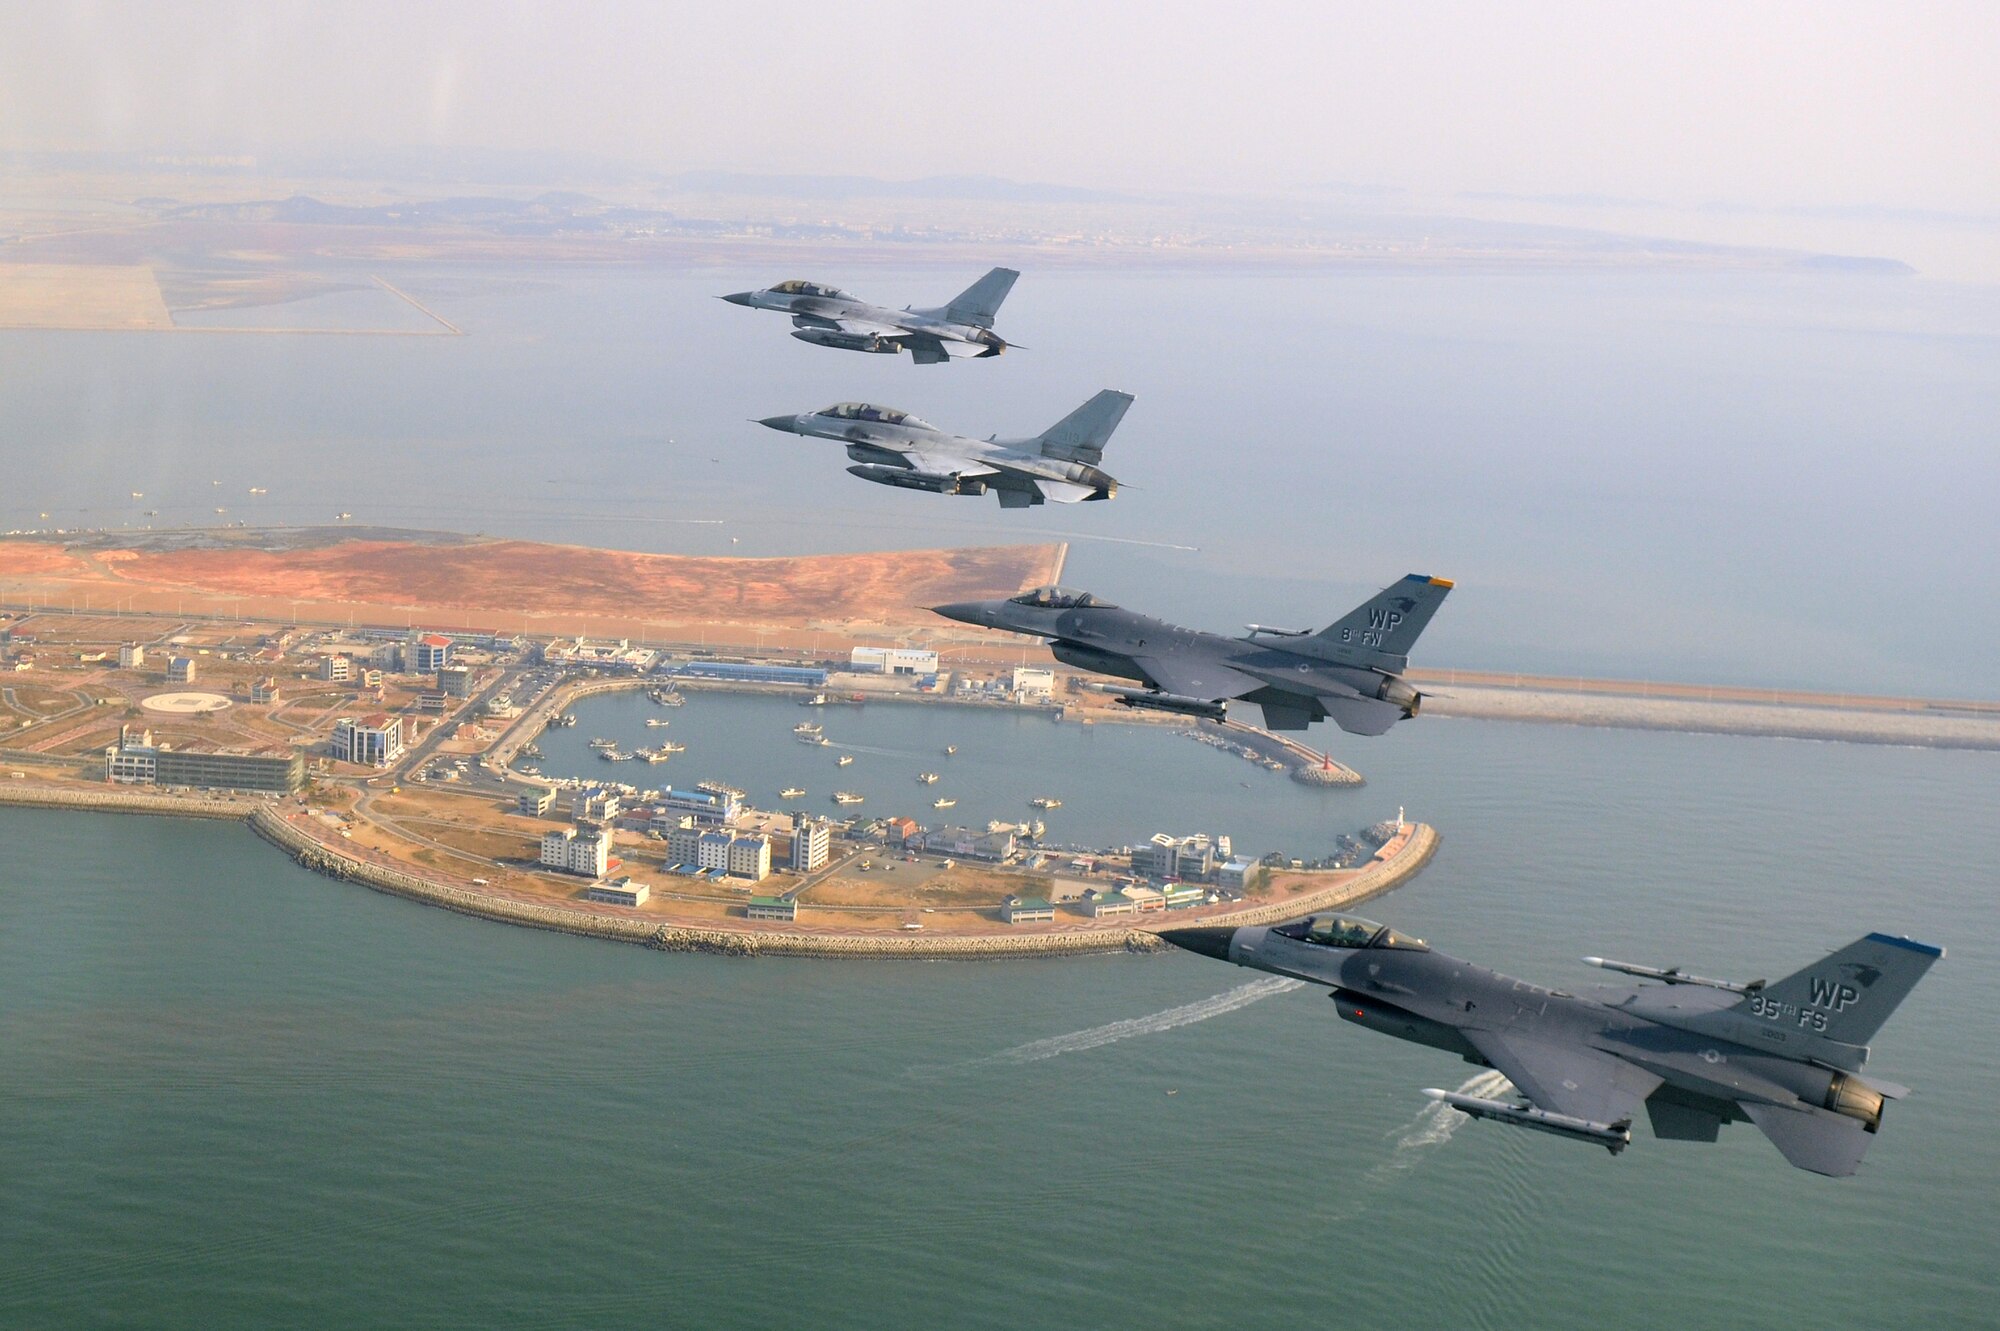 KUNSAN AIR BASE, Republic of Korea -- Four F-16 Fighting Falcons fly over the Piung Harbor during a U.S. and Republic of Korea Air Force Coalition flight Nov. 10 in celebration of the 60th anniversary of the Korean War. (U.S. Air Force photo/Master Sgt. Jason Wilkerson)